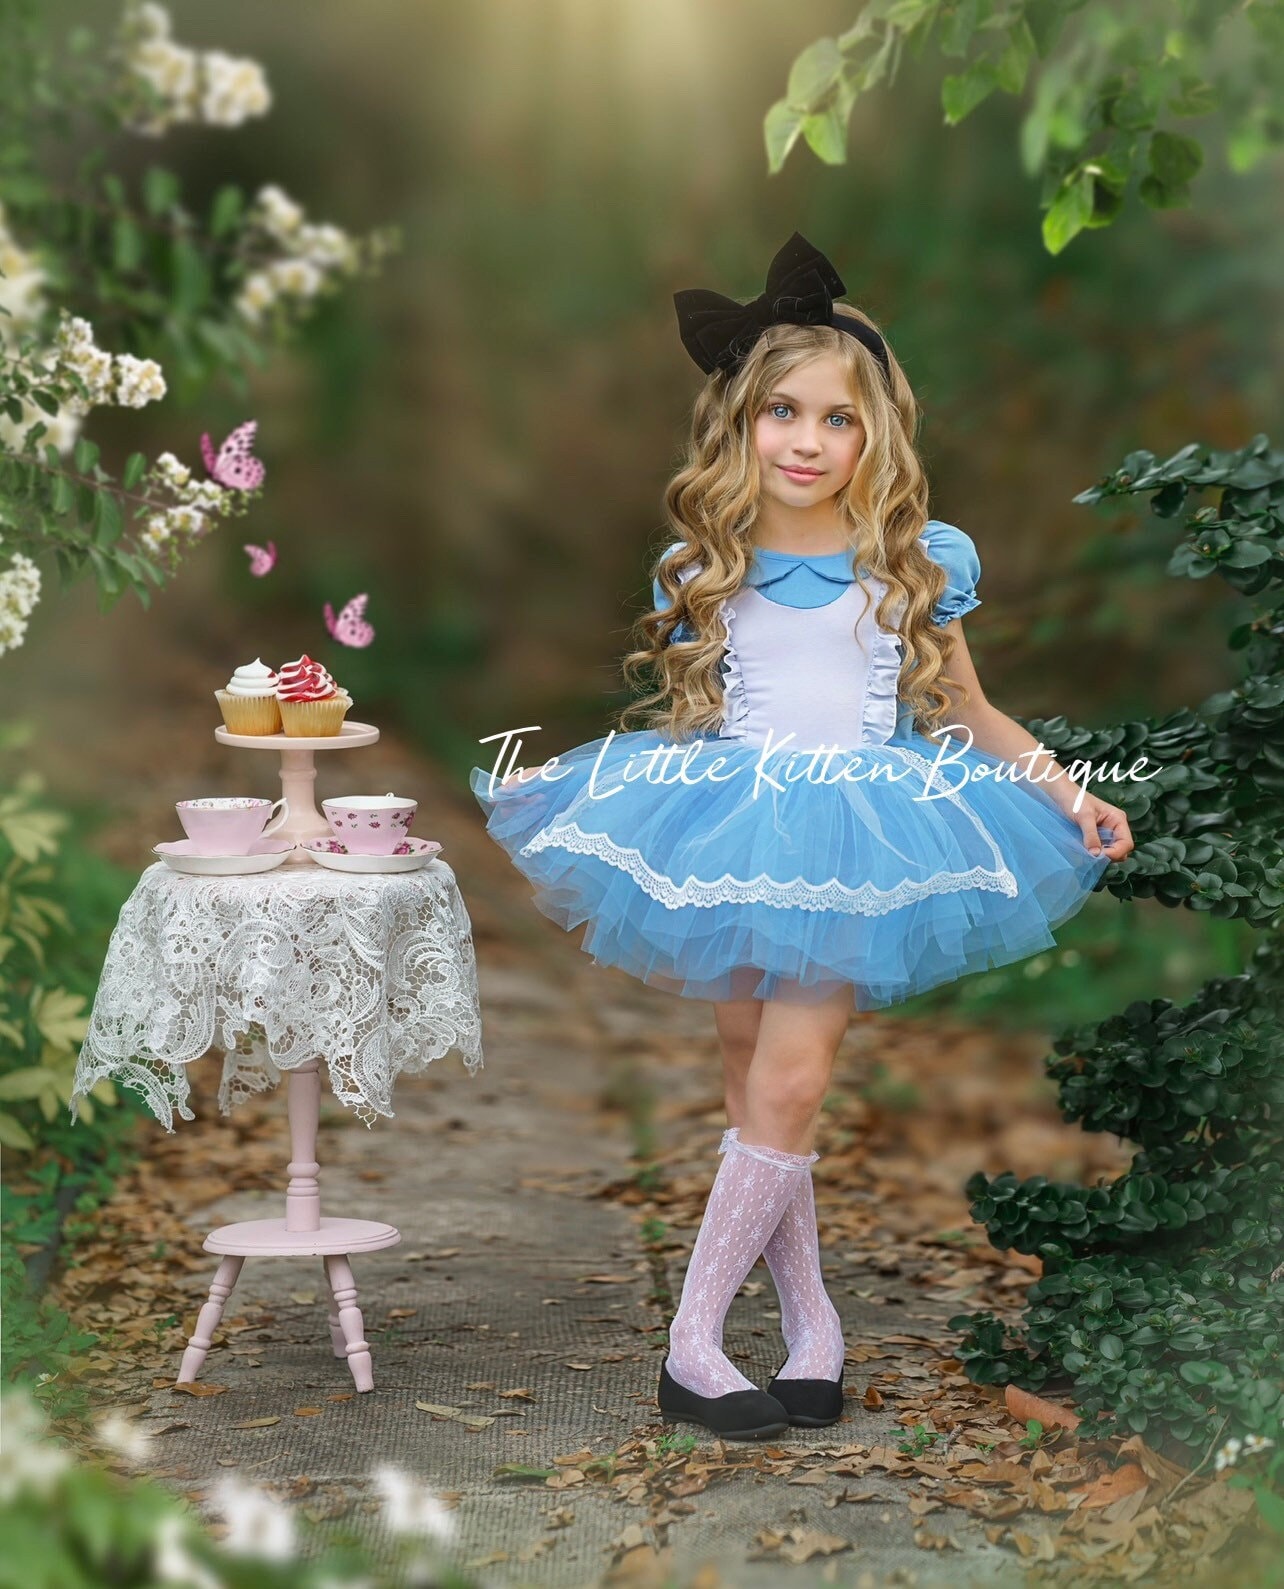 Alice in Wonderland Themed Party - Pretty My Party